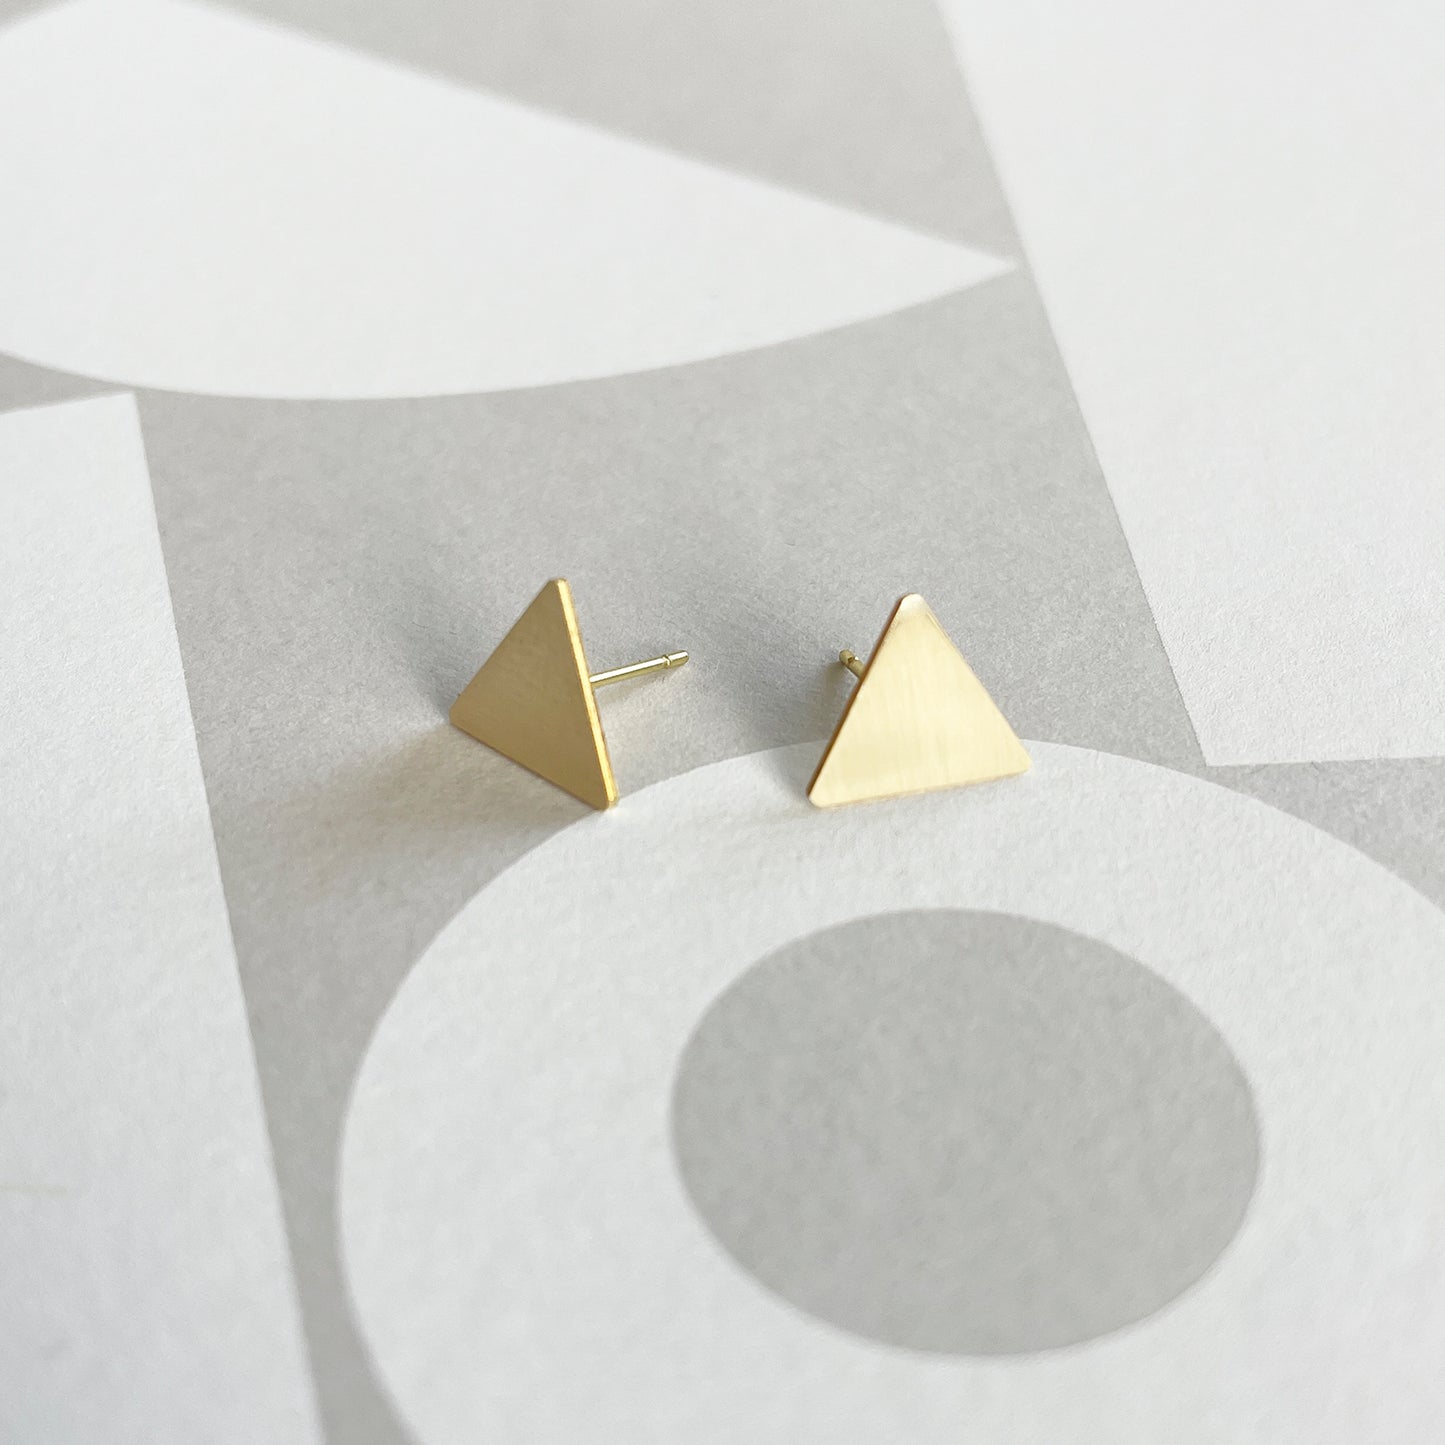 Triangle Stack Earrings